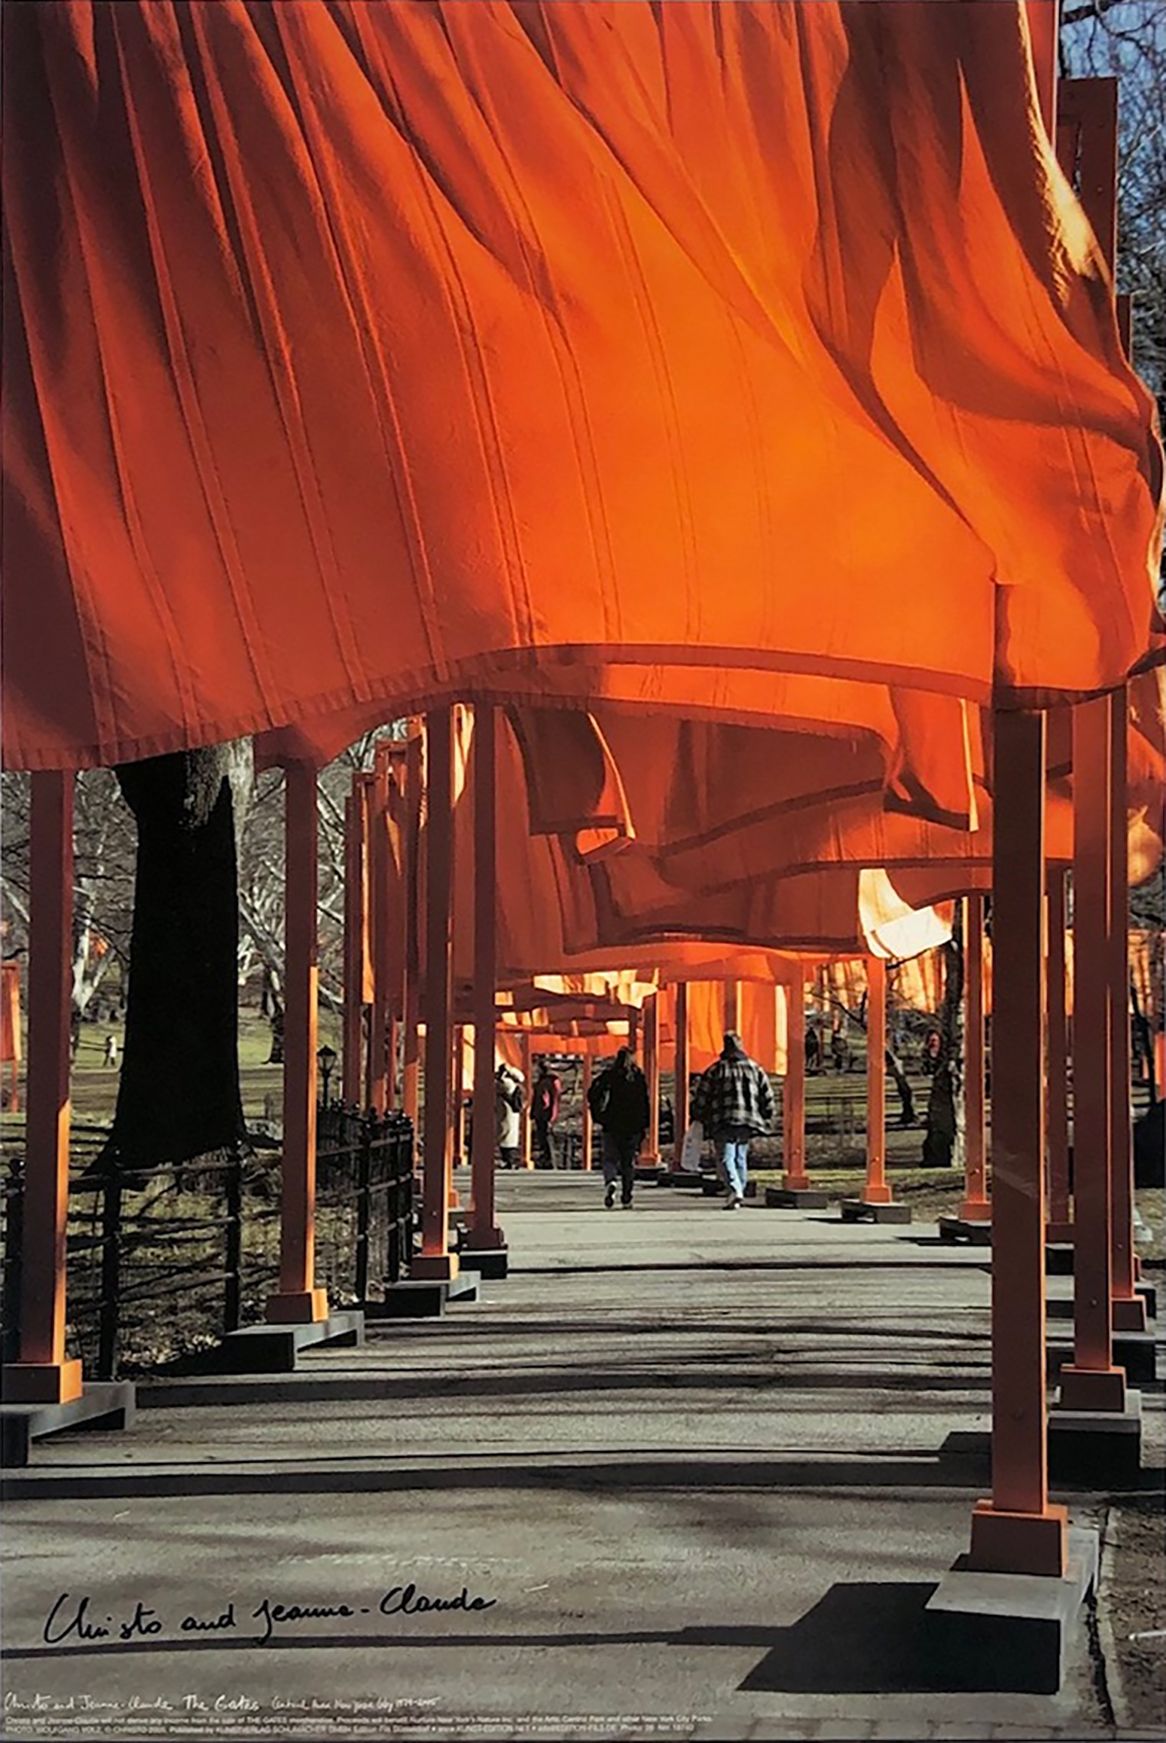 CHRISTO and JEANNE CLAUDE, The Gates Central Park - New York City CHRISTO and JE&hellip;